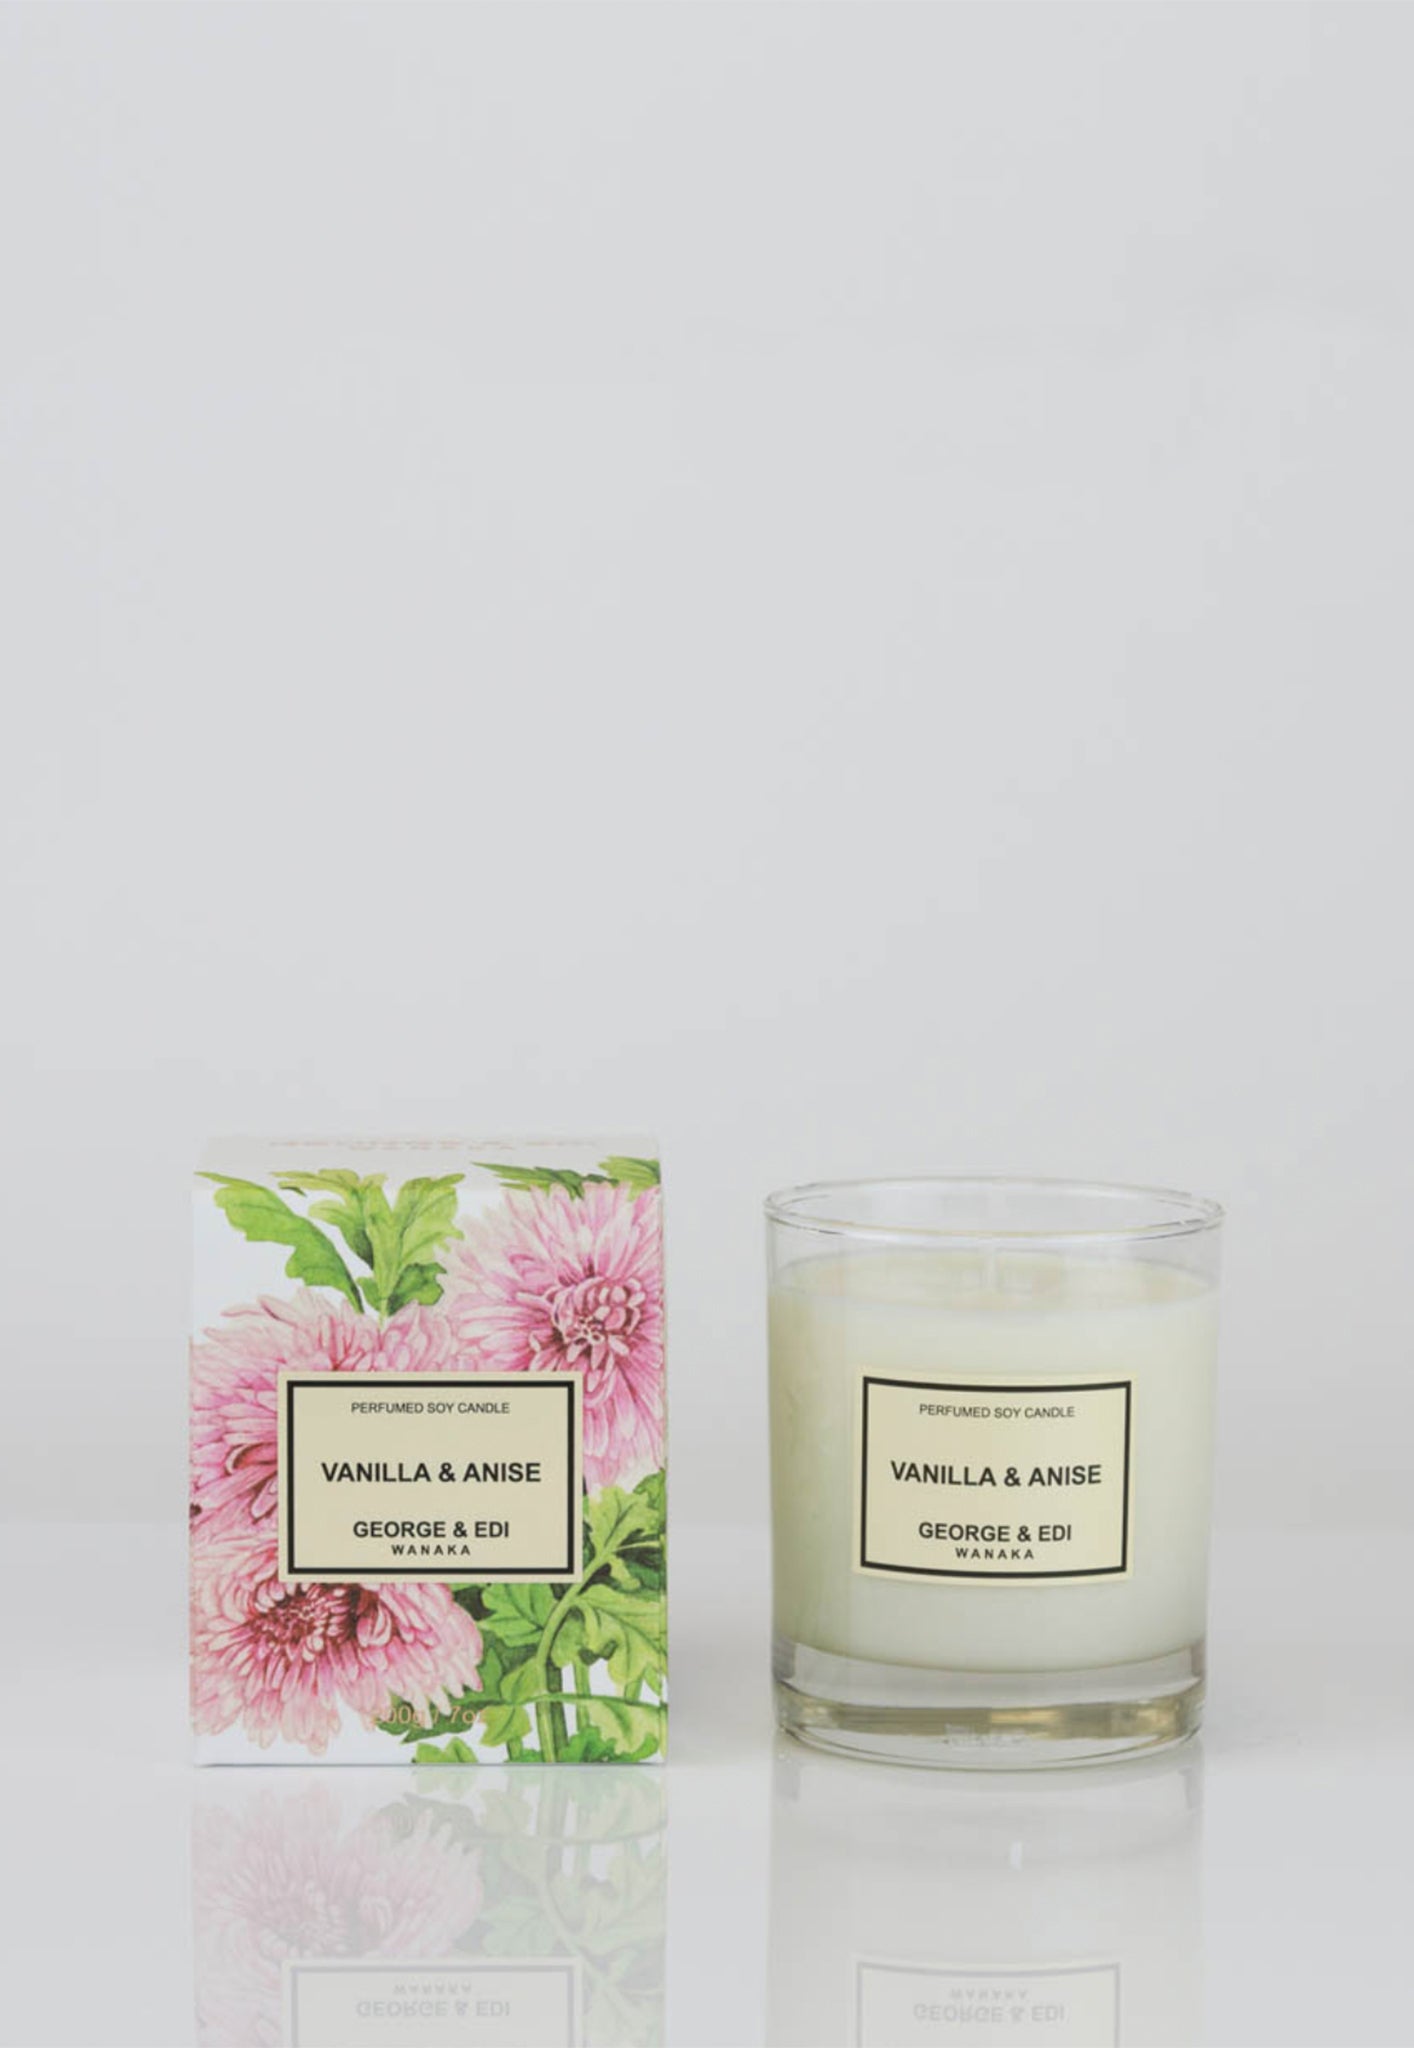 Vanilla & Anise Perfumed Soy Candle sold by Angel Divine